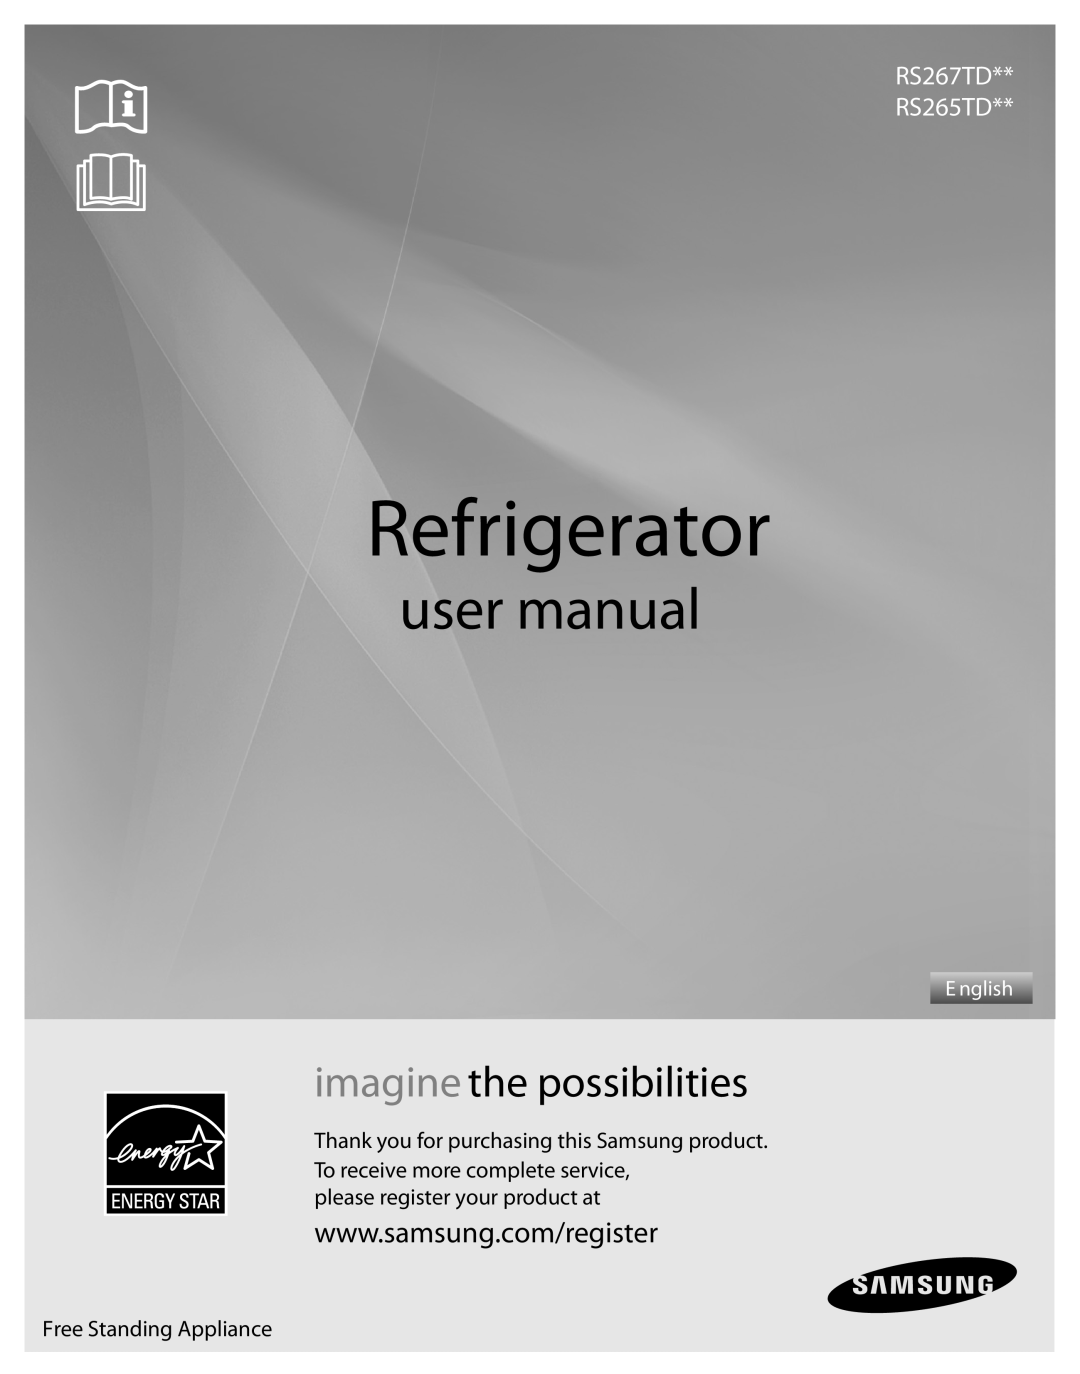 Samsung user manual Refrigerator, RS267TD RS265TD, imagine the possibilities, please register your product at, E nglish 